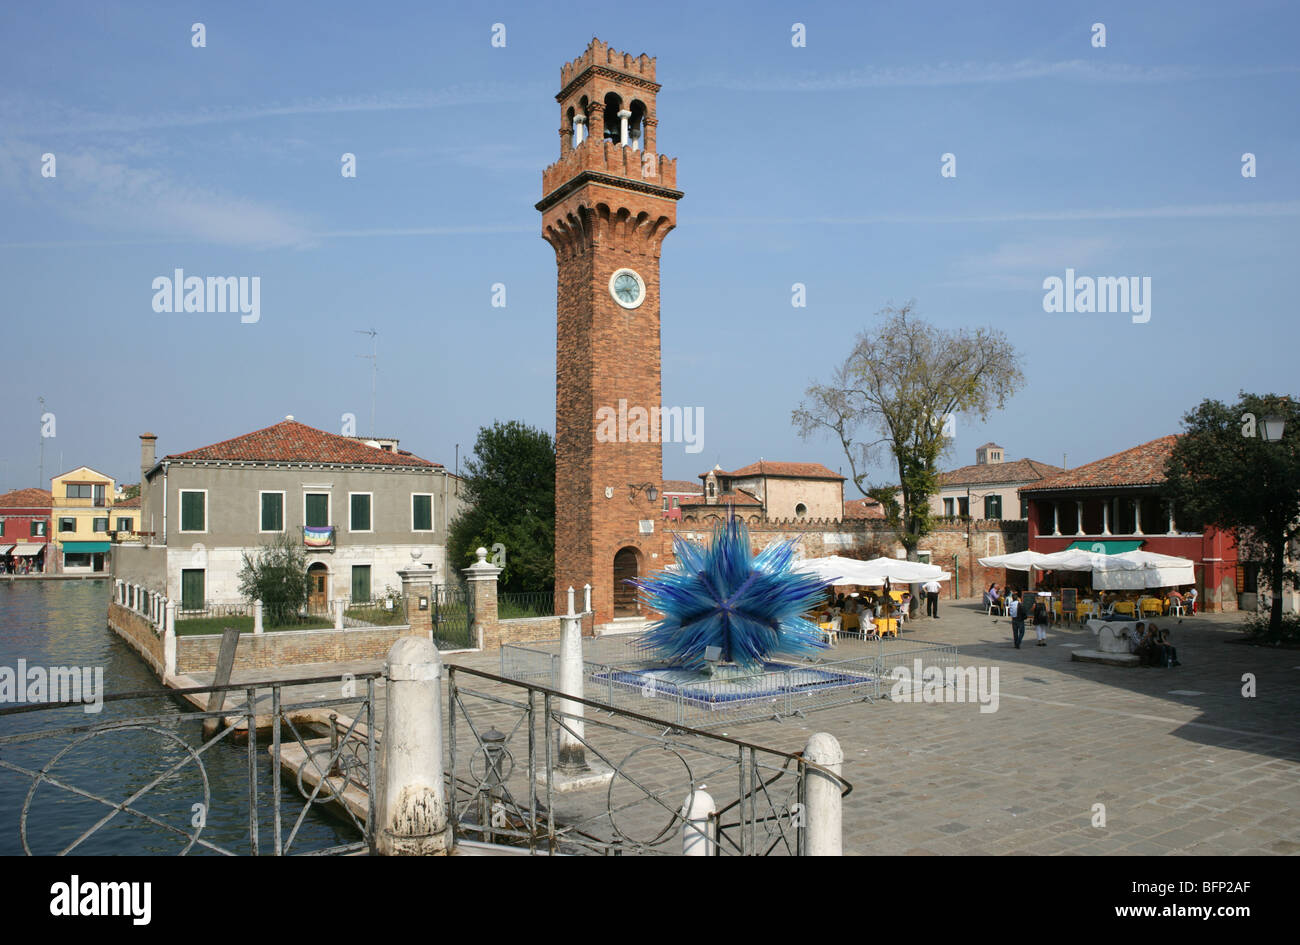 Venice, Murano, Campo San Stefano, tower with glass sculpture Stock Photo